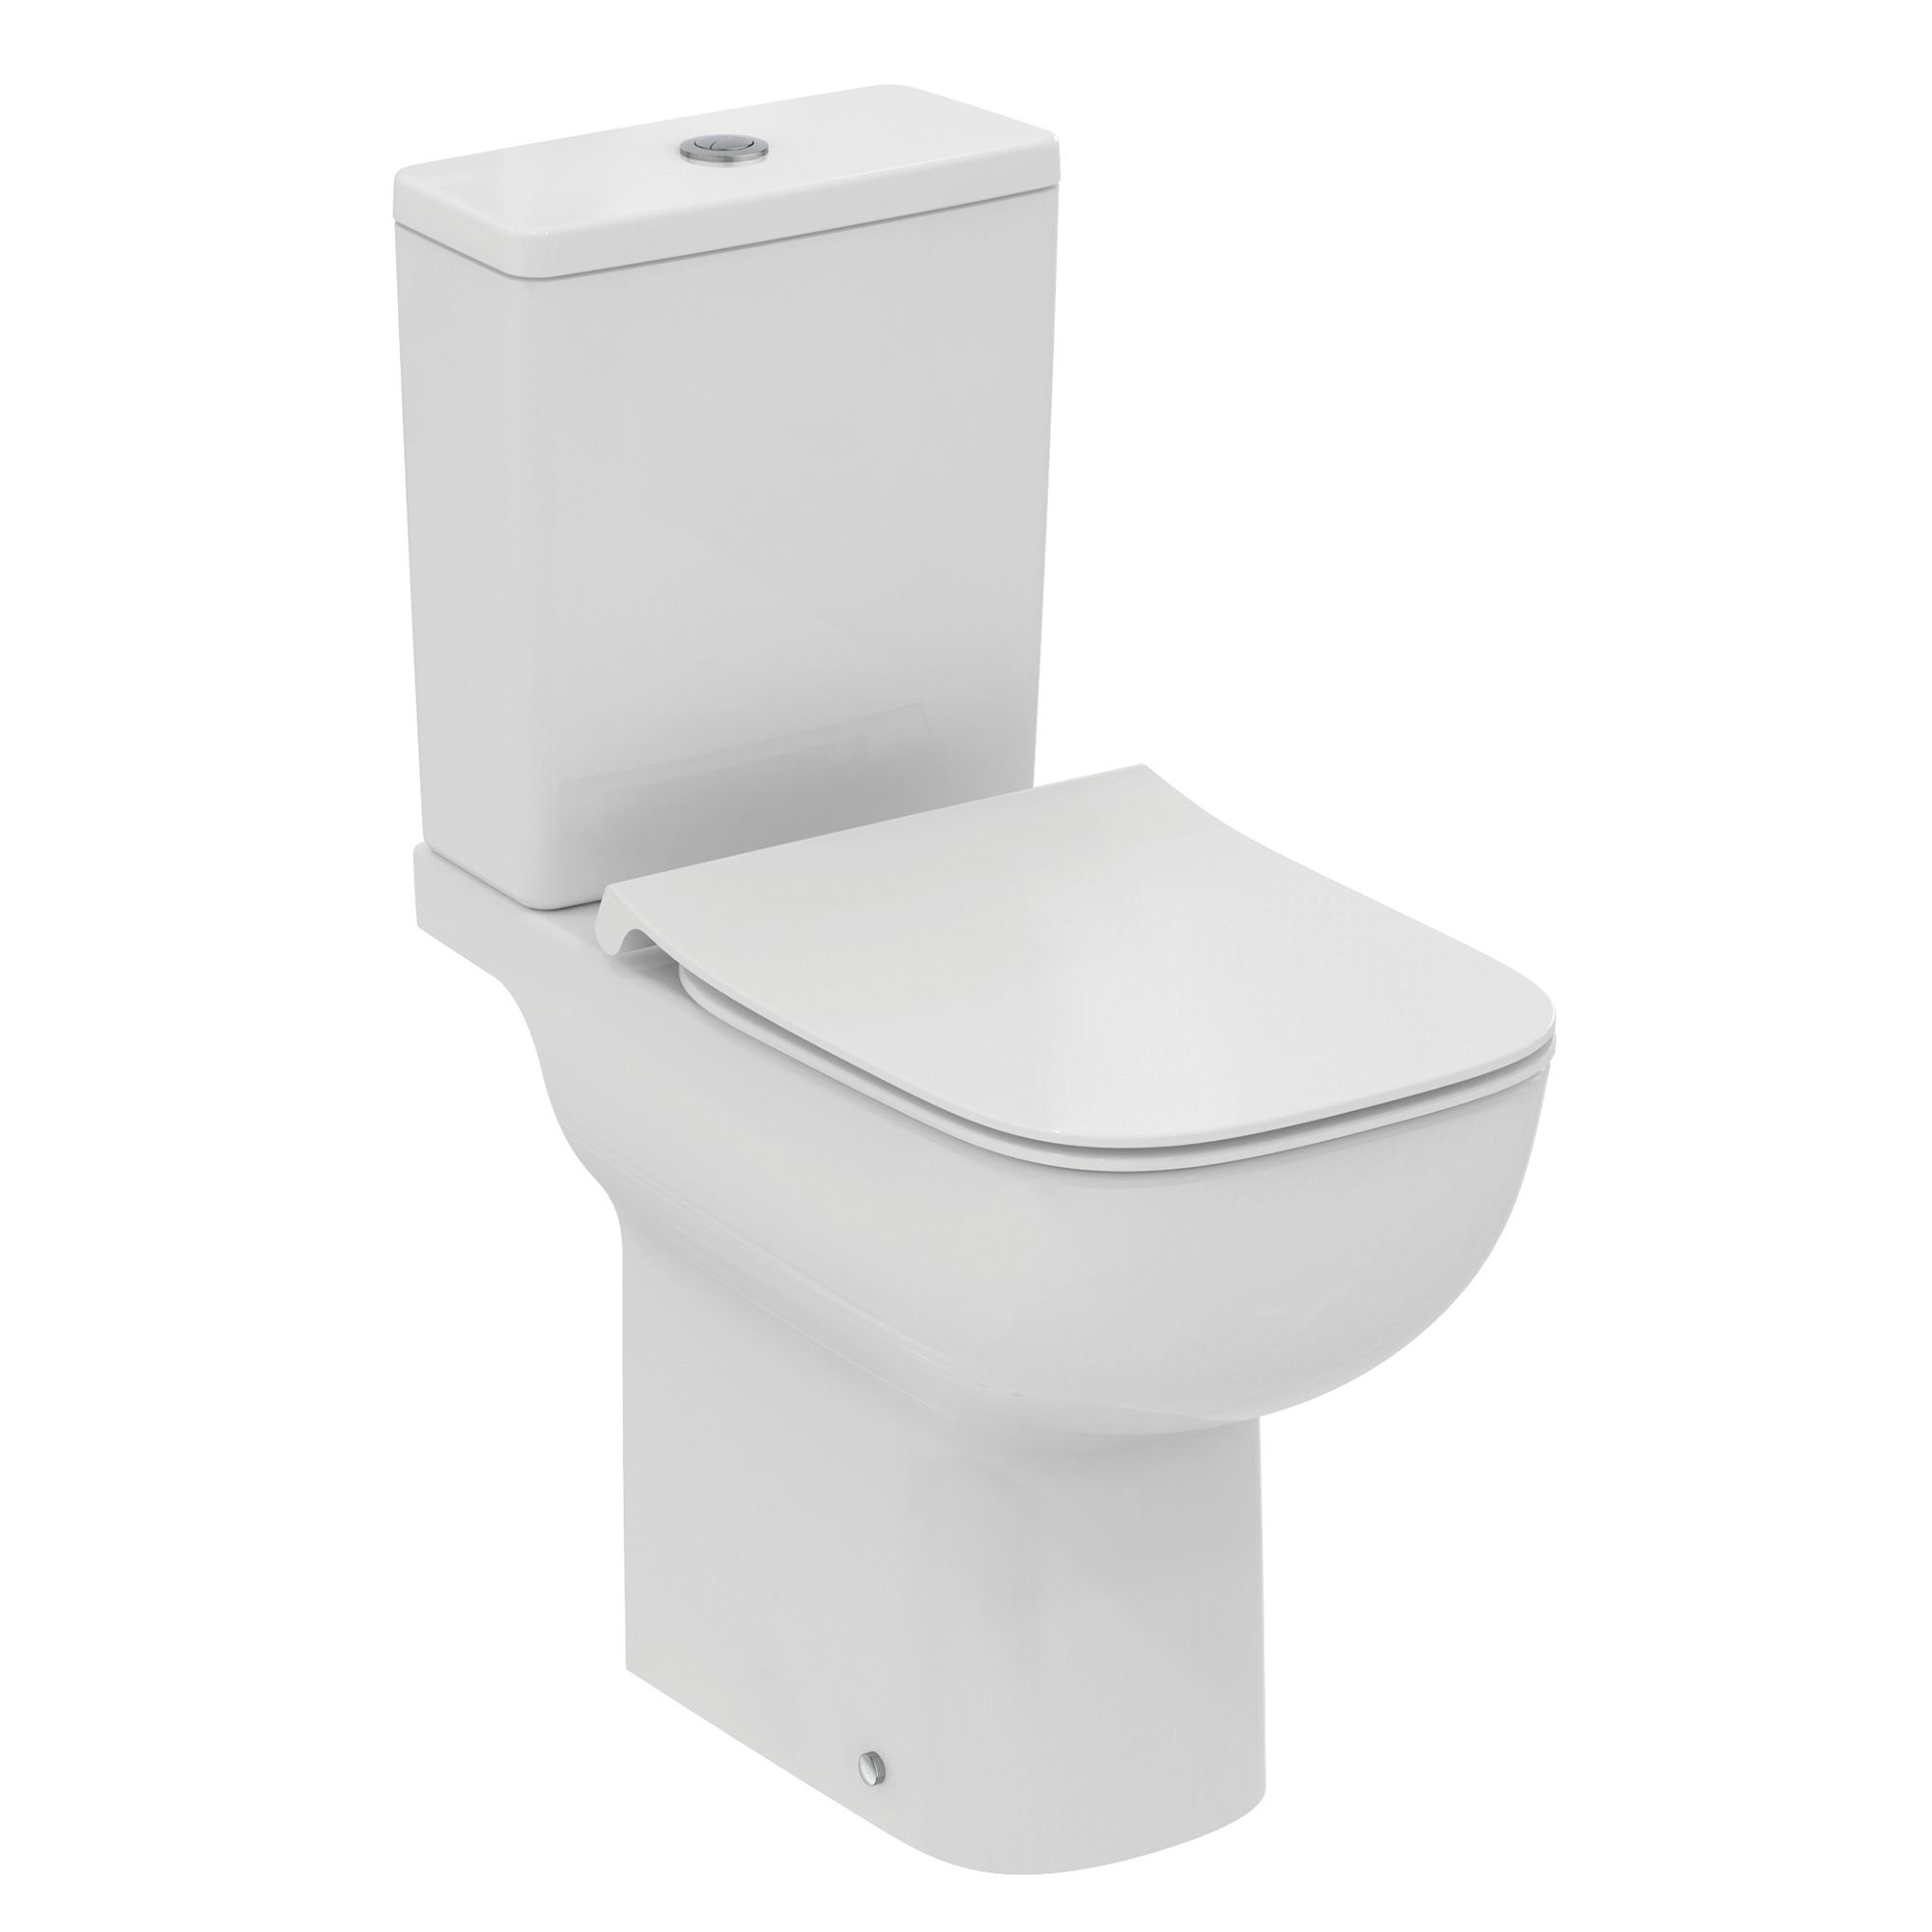 Ideal Standard i.life A White Standard Open back Square Comfort height Close coupled Toilet set with Soft close seat